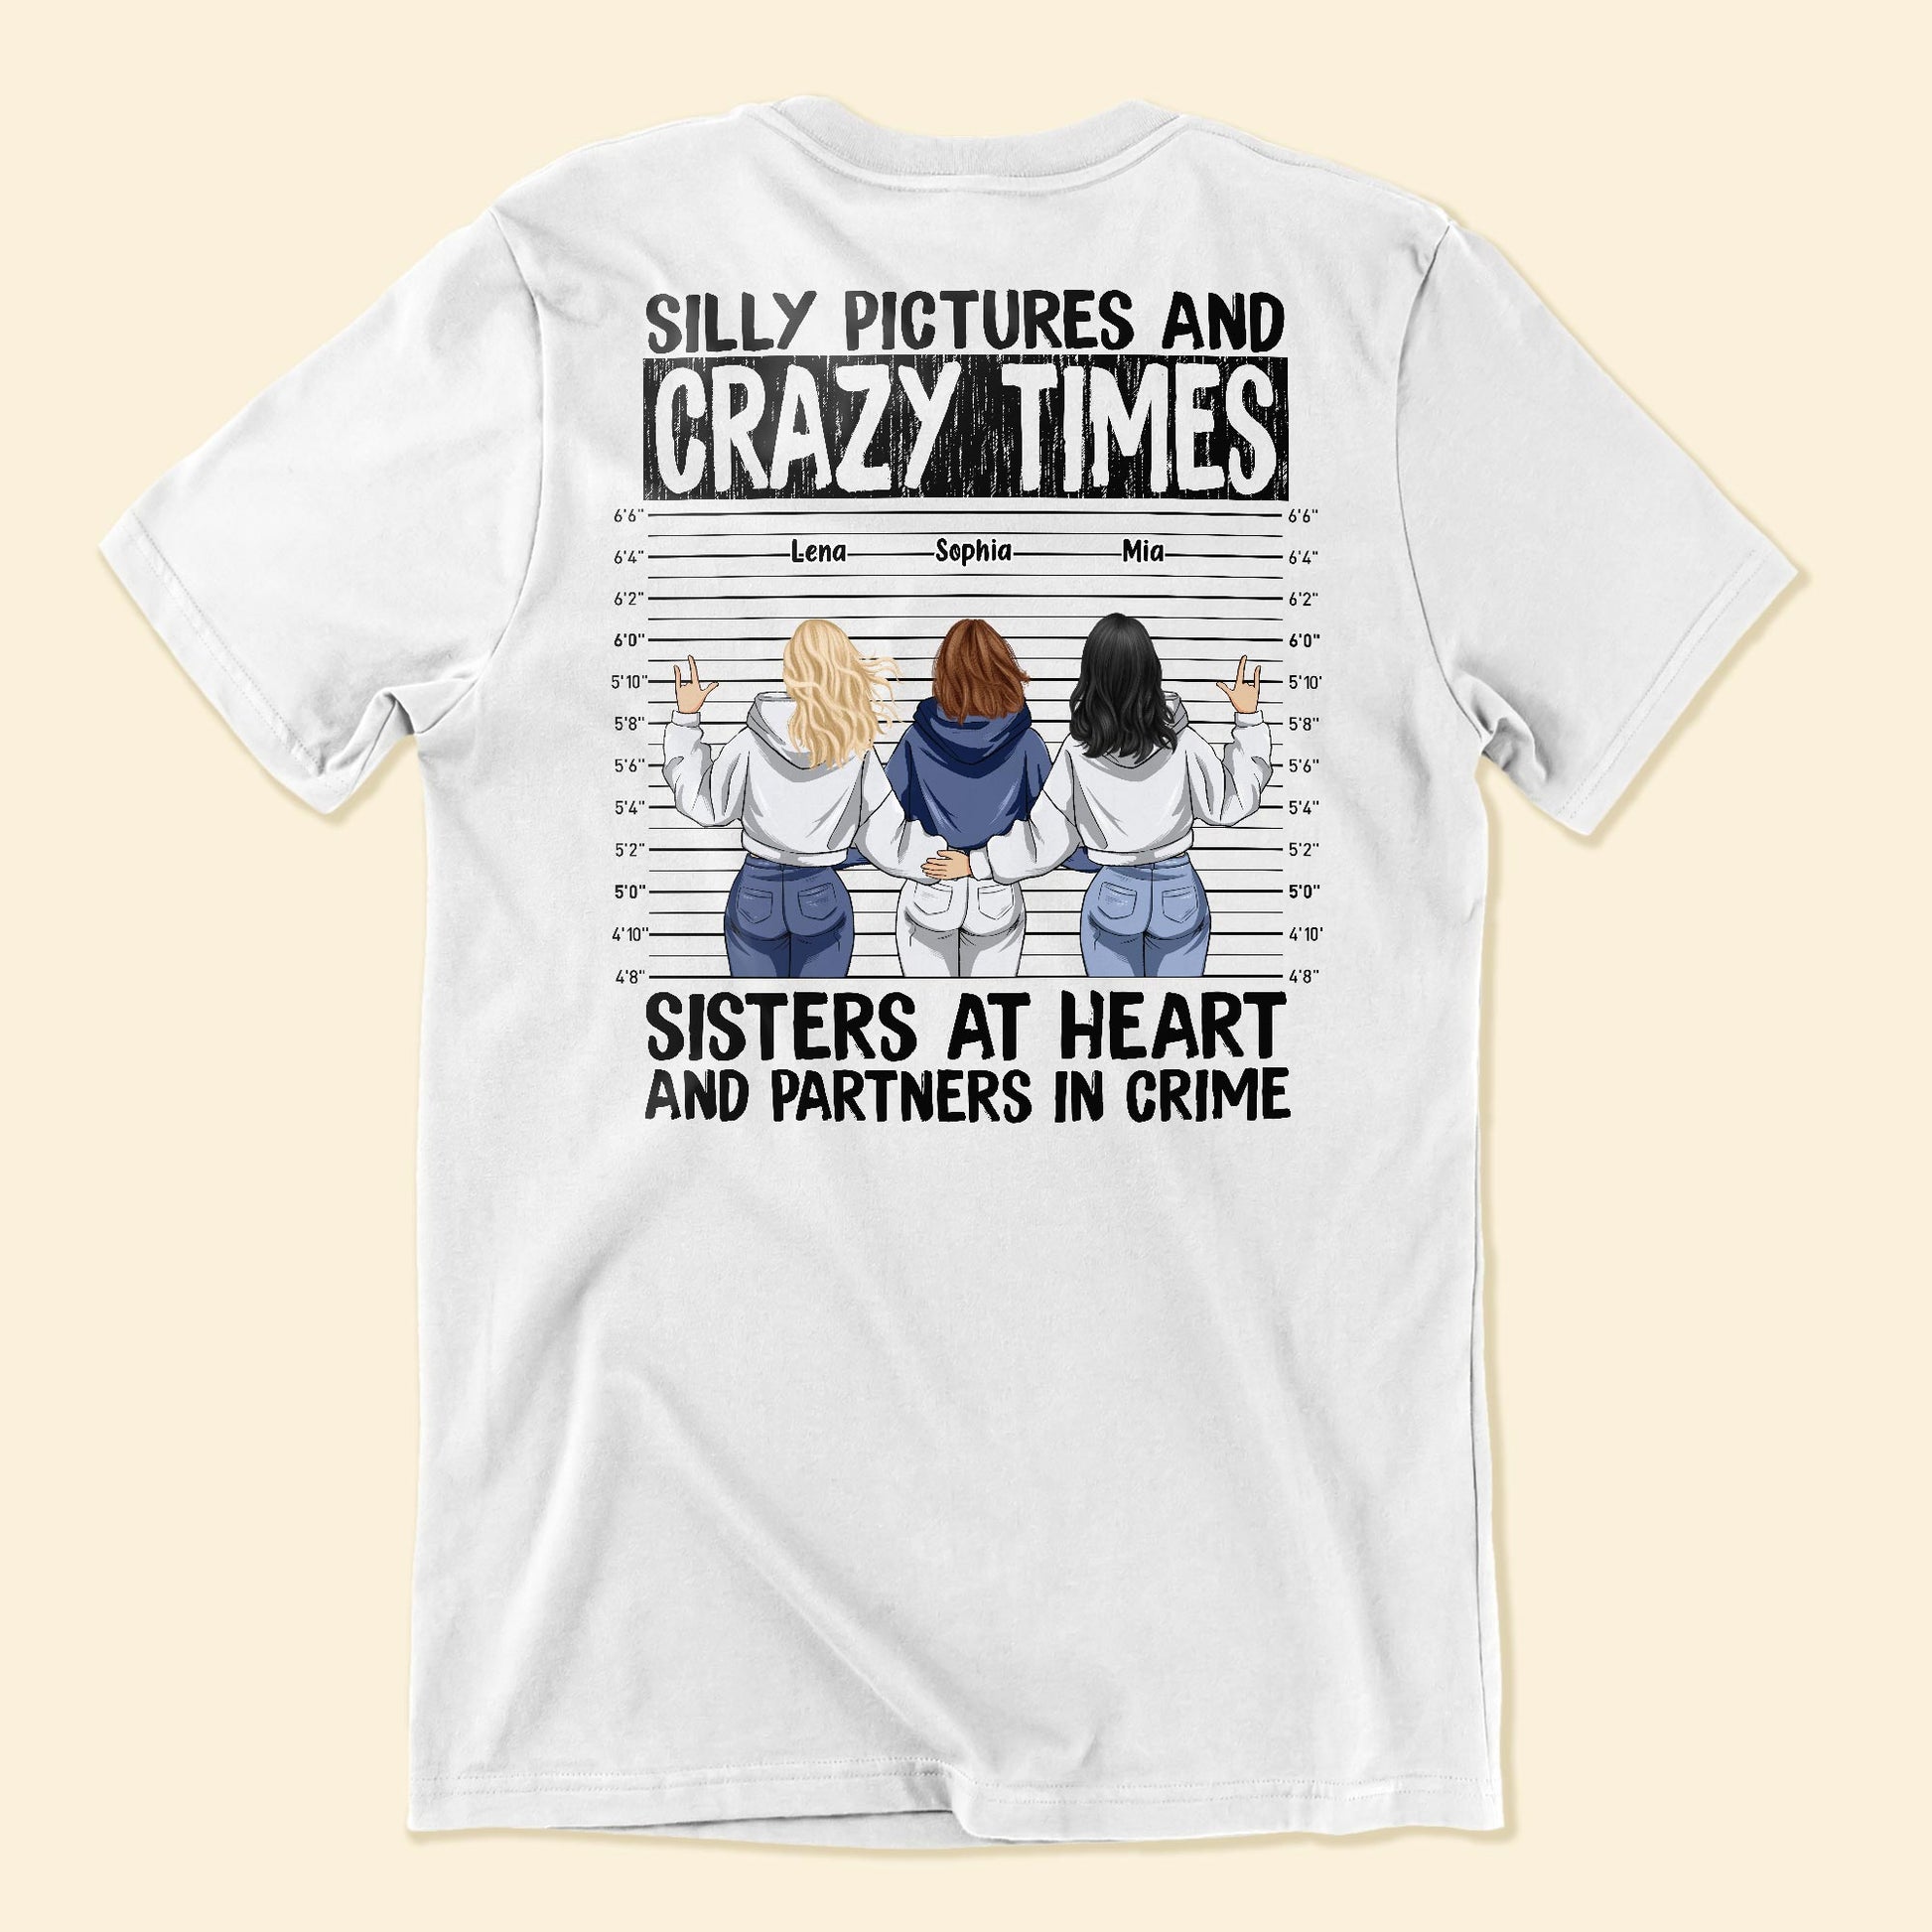 https://macorner.co/cdn/shop/products/Silly-Pictures-Crazy-Times-Sisters-At-Heart-Partners-In-Crime-Personalized-Shirt-Funny-Birthday-Friendship-Gift-For-Besties-BFF-Best-Friends-Soul-Sisters_2.jpg?v=1656996216&width=1946